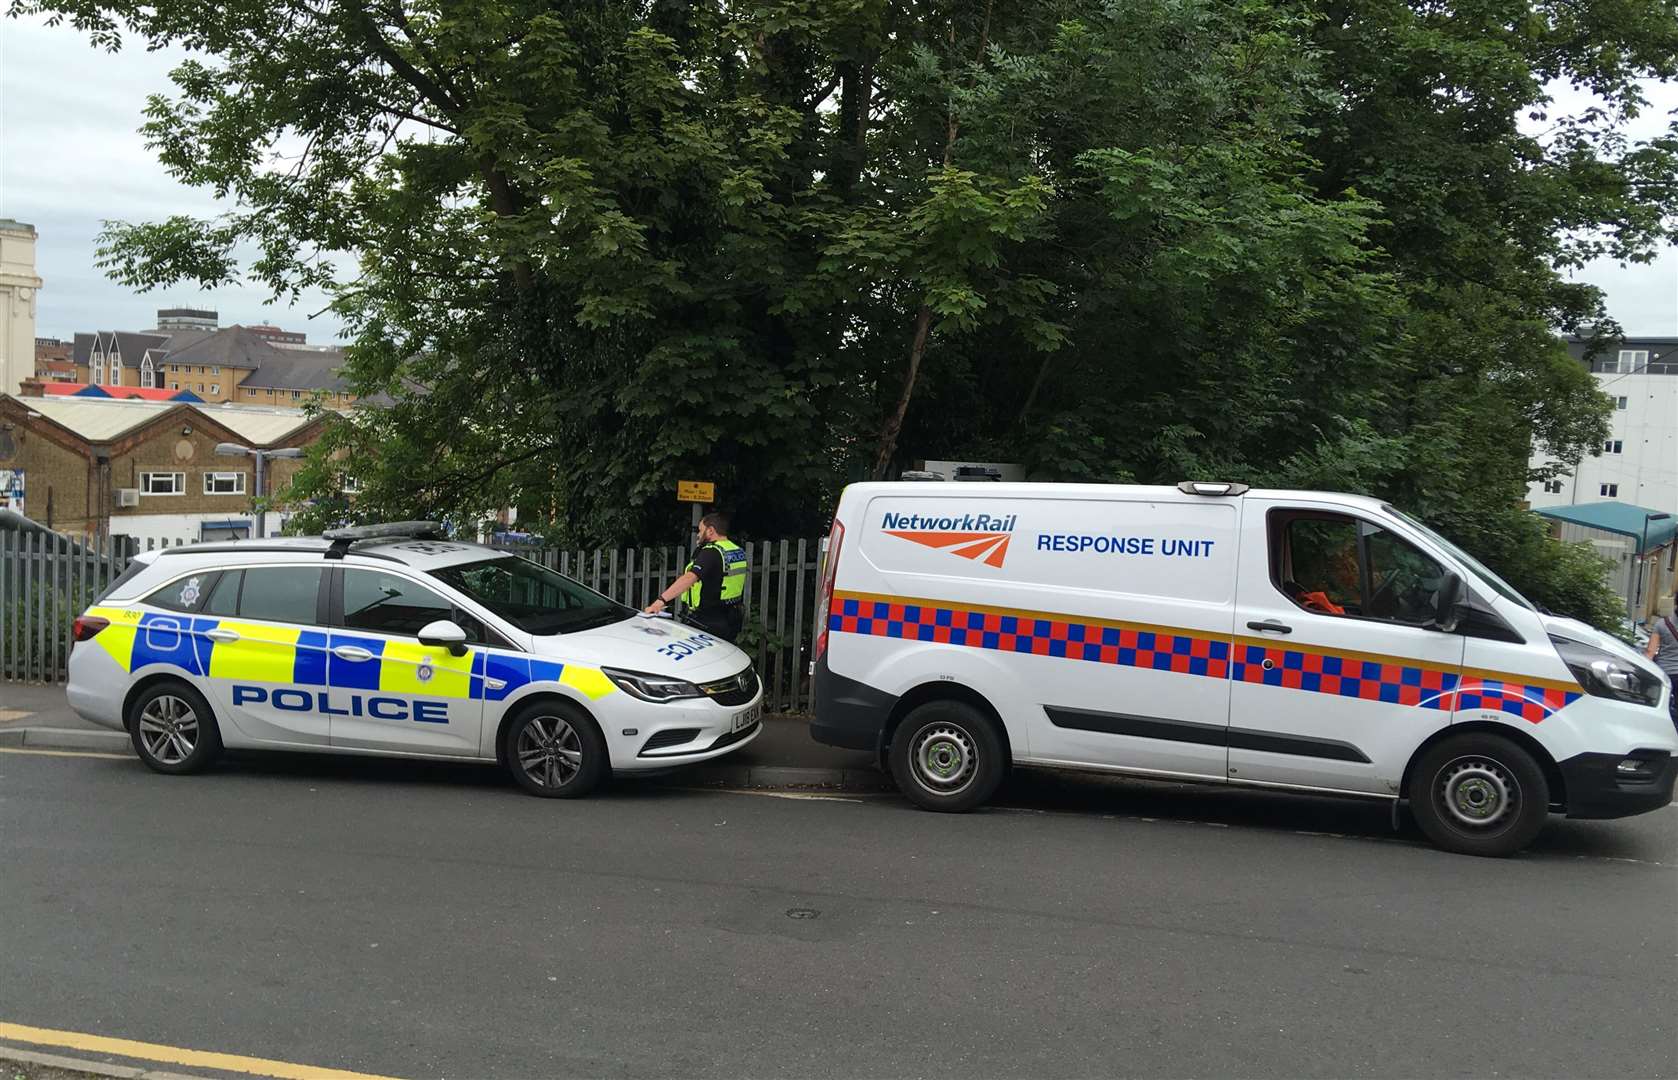 Police and a Network Rail response vehicle were at the station